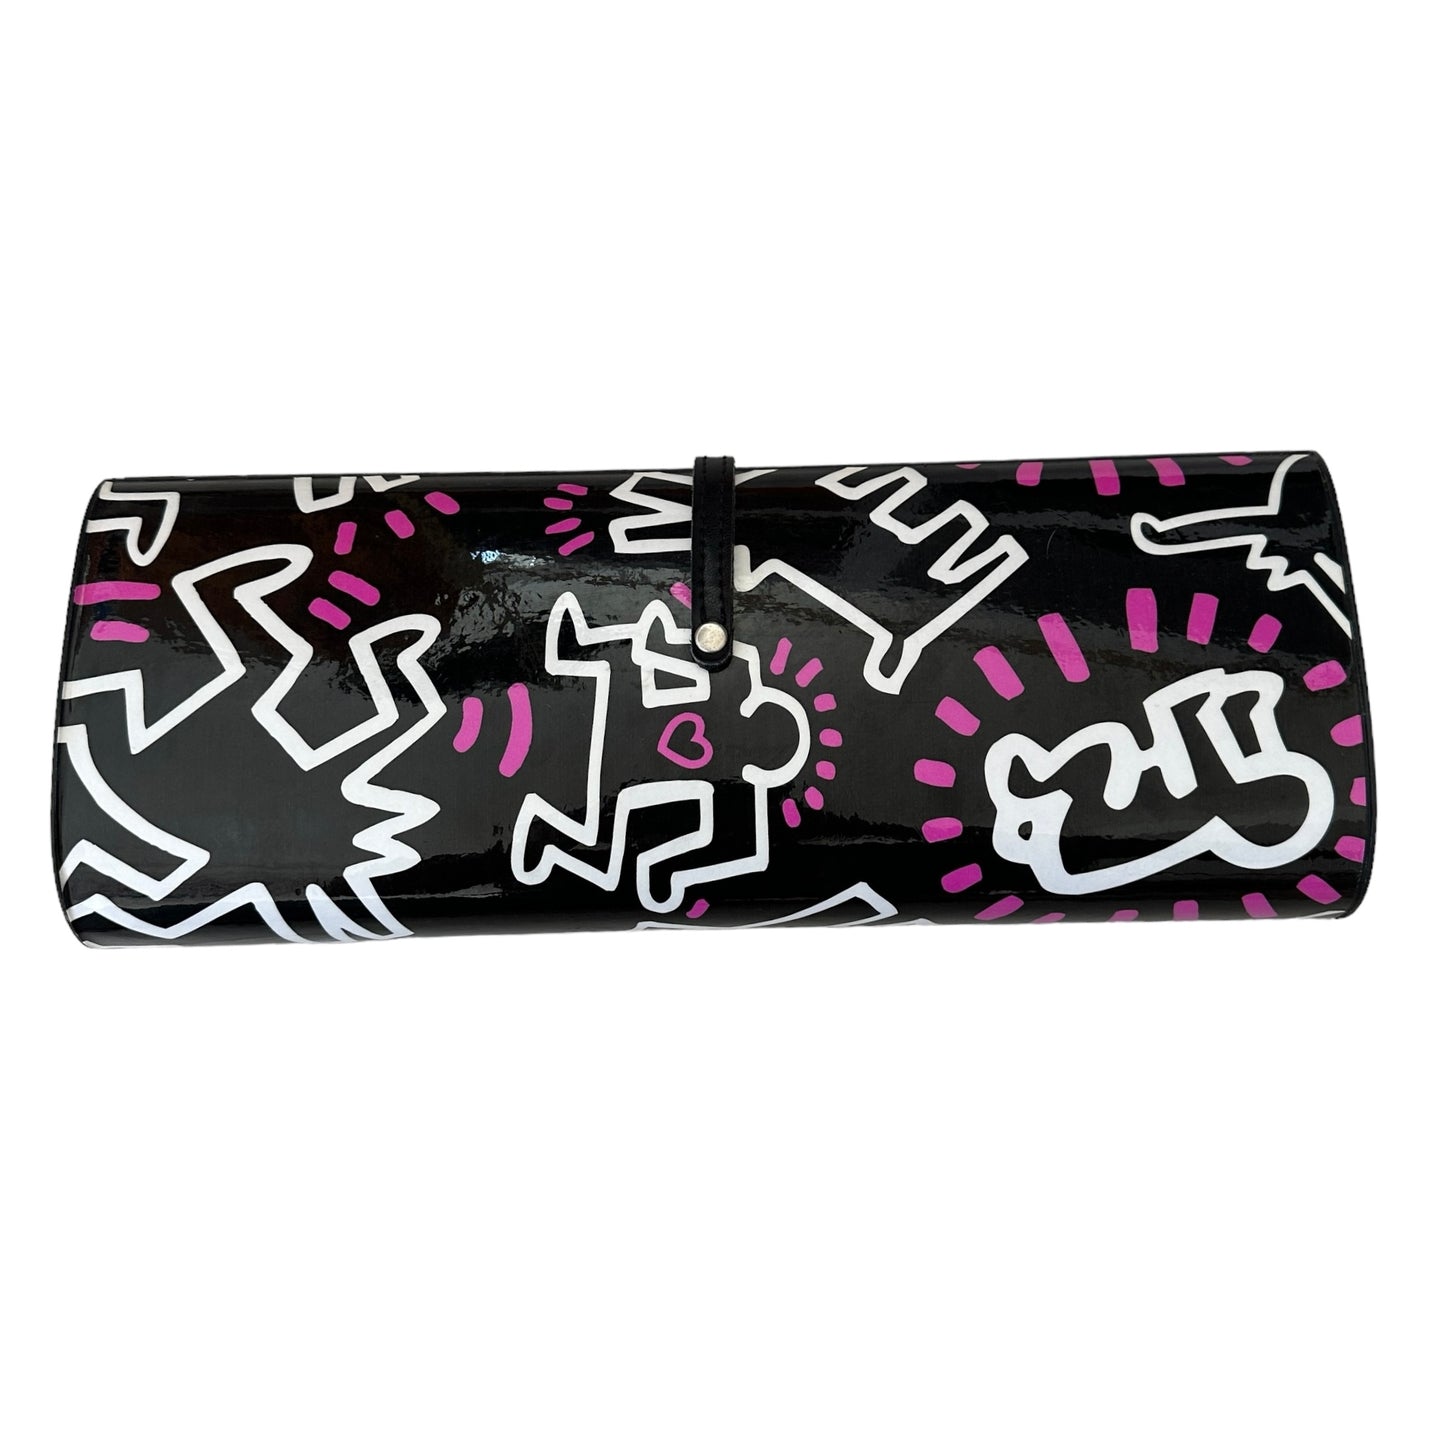 Keith Haring x House of Fields Clutch